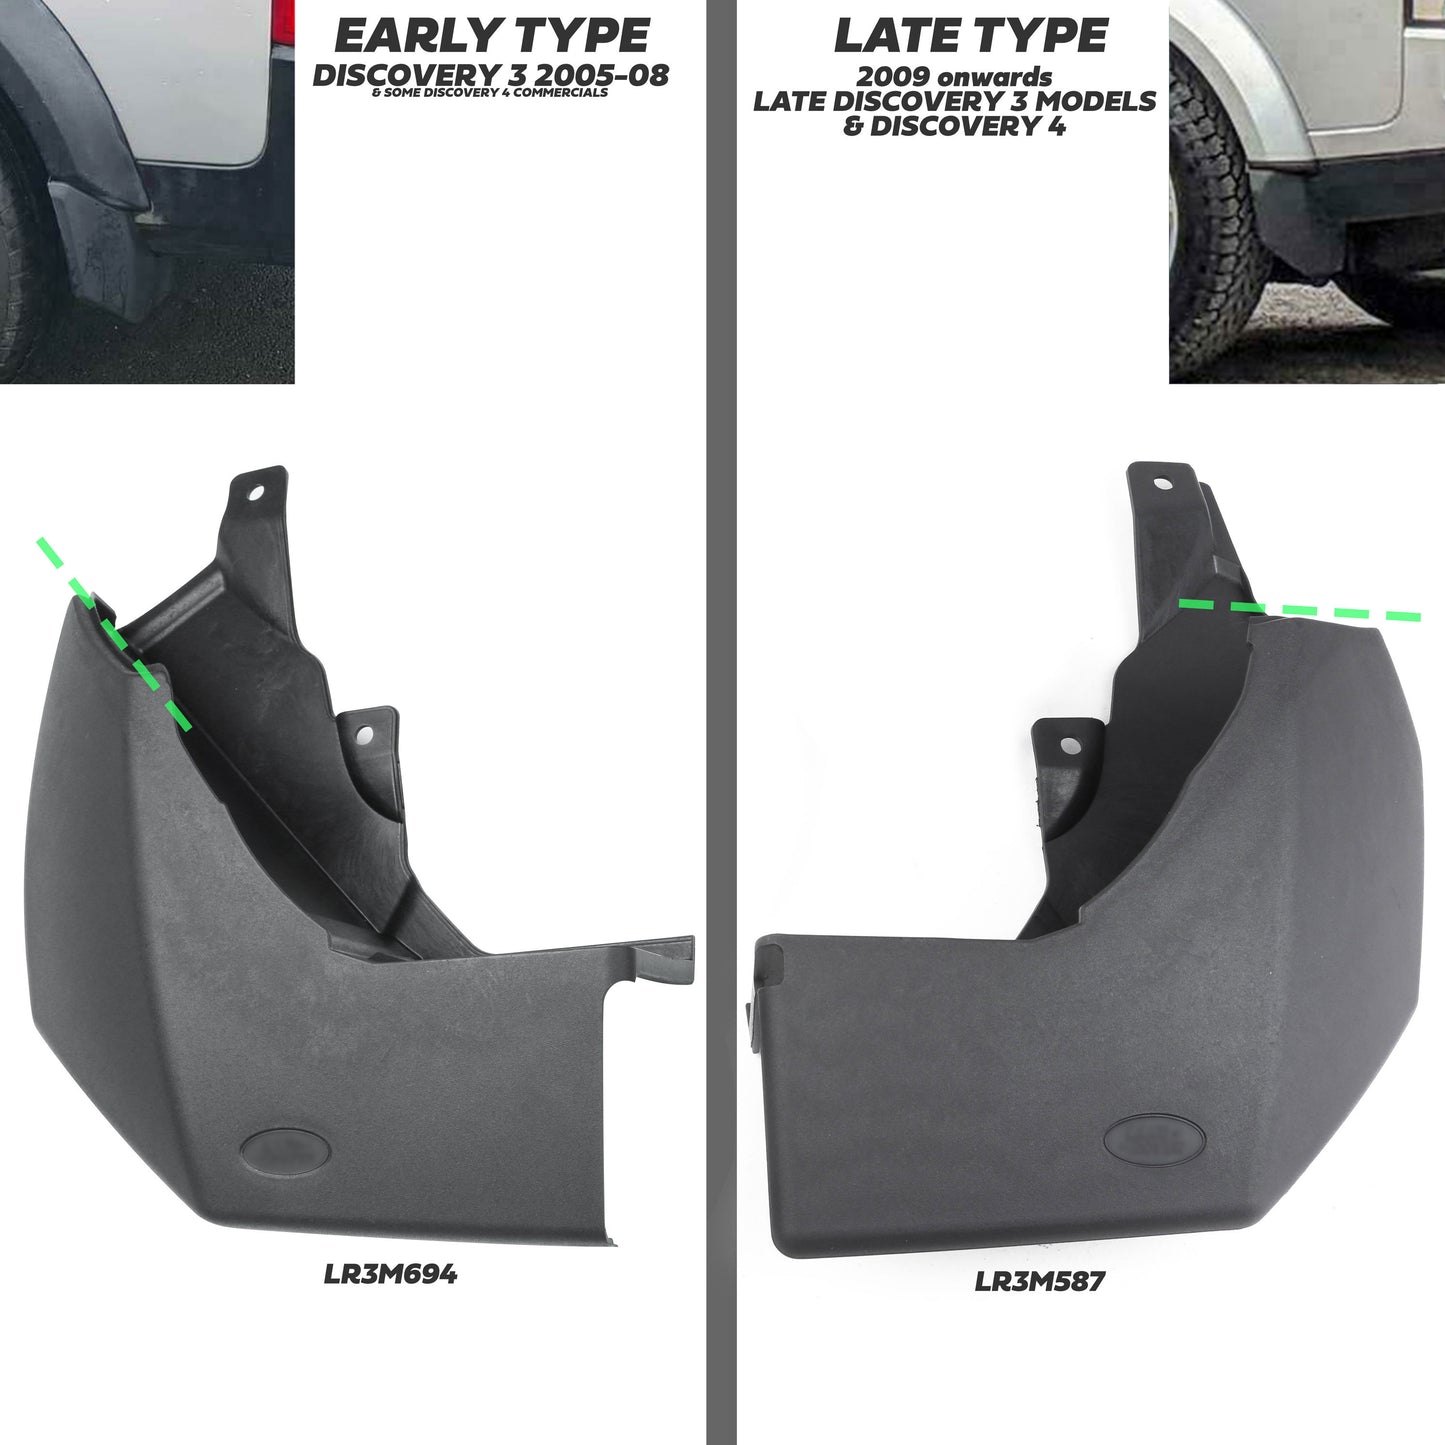 Front & Rear Mudflap Kit for Land Rover Discovery 3/4 - Late Type (2009+)